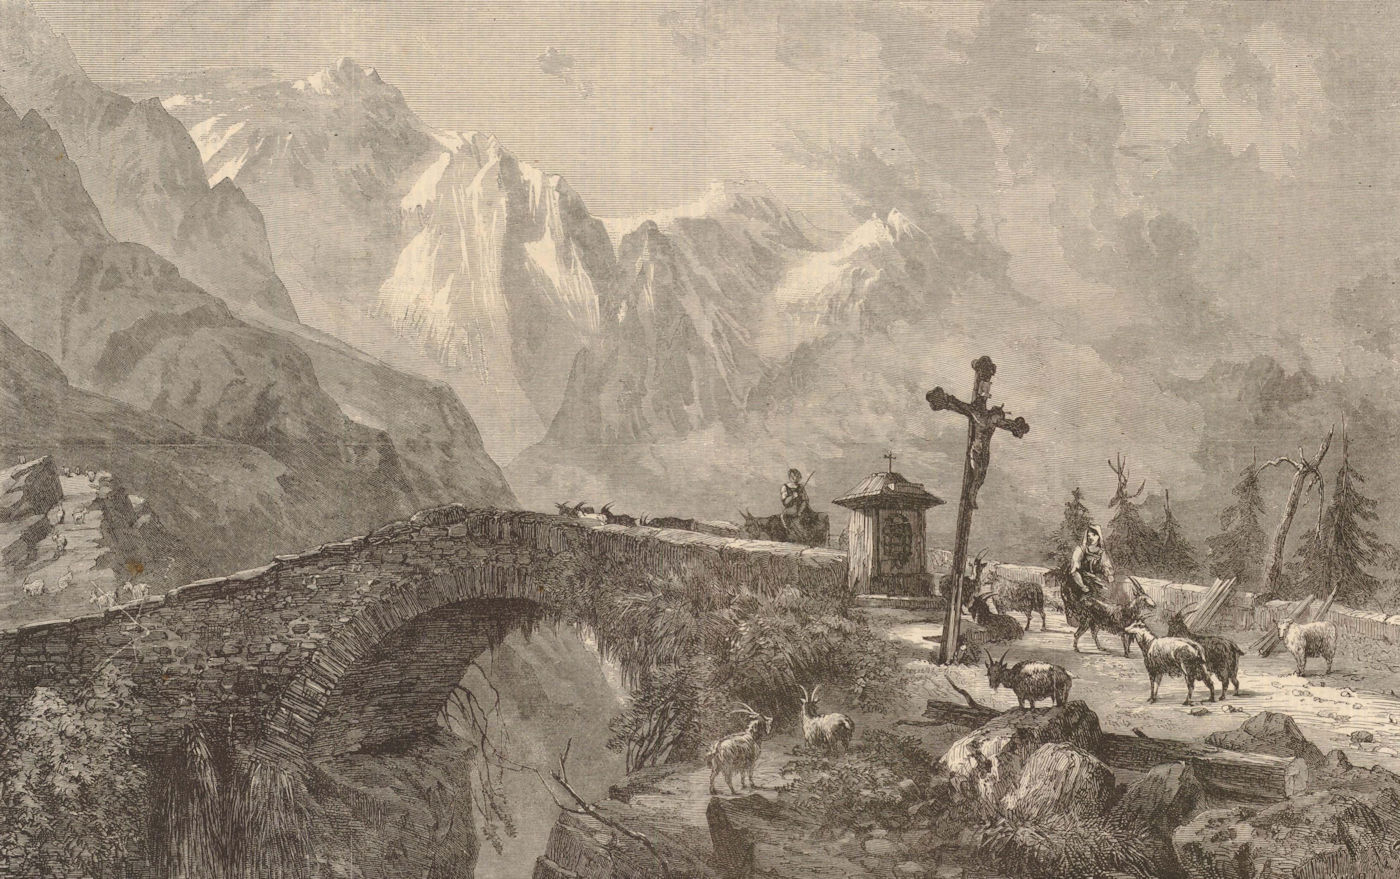 Associate Product Morning in the Fieschertal - Going up to the high pasturage. Switzerland 1861